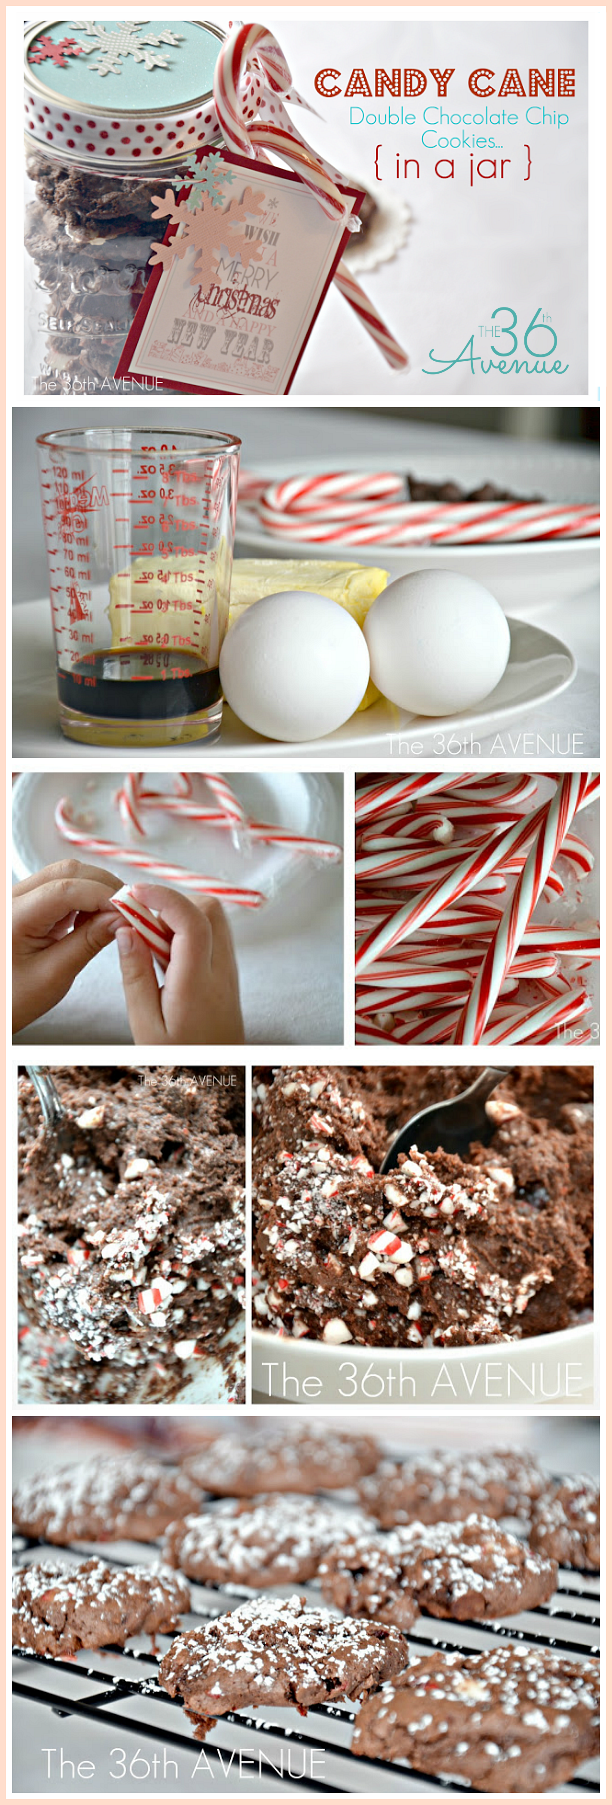 https://www.the36thavenue.com/wp-content/uploads/2011/12/Candy-Cane-Mint-Cookie-Recipe-the36thavenue.com_.png